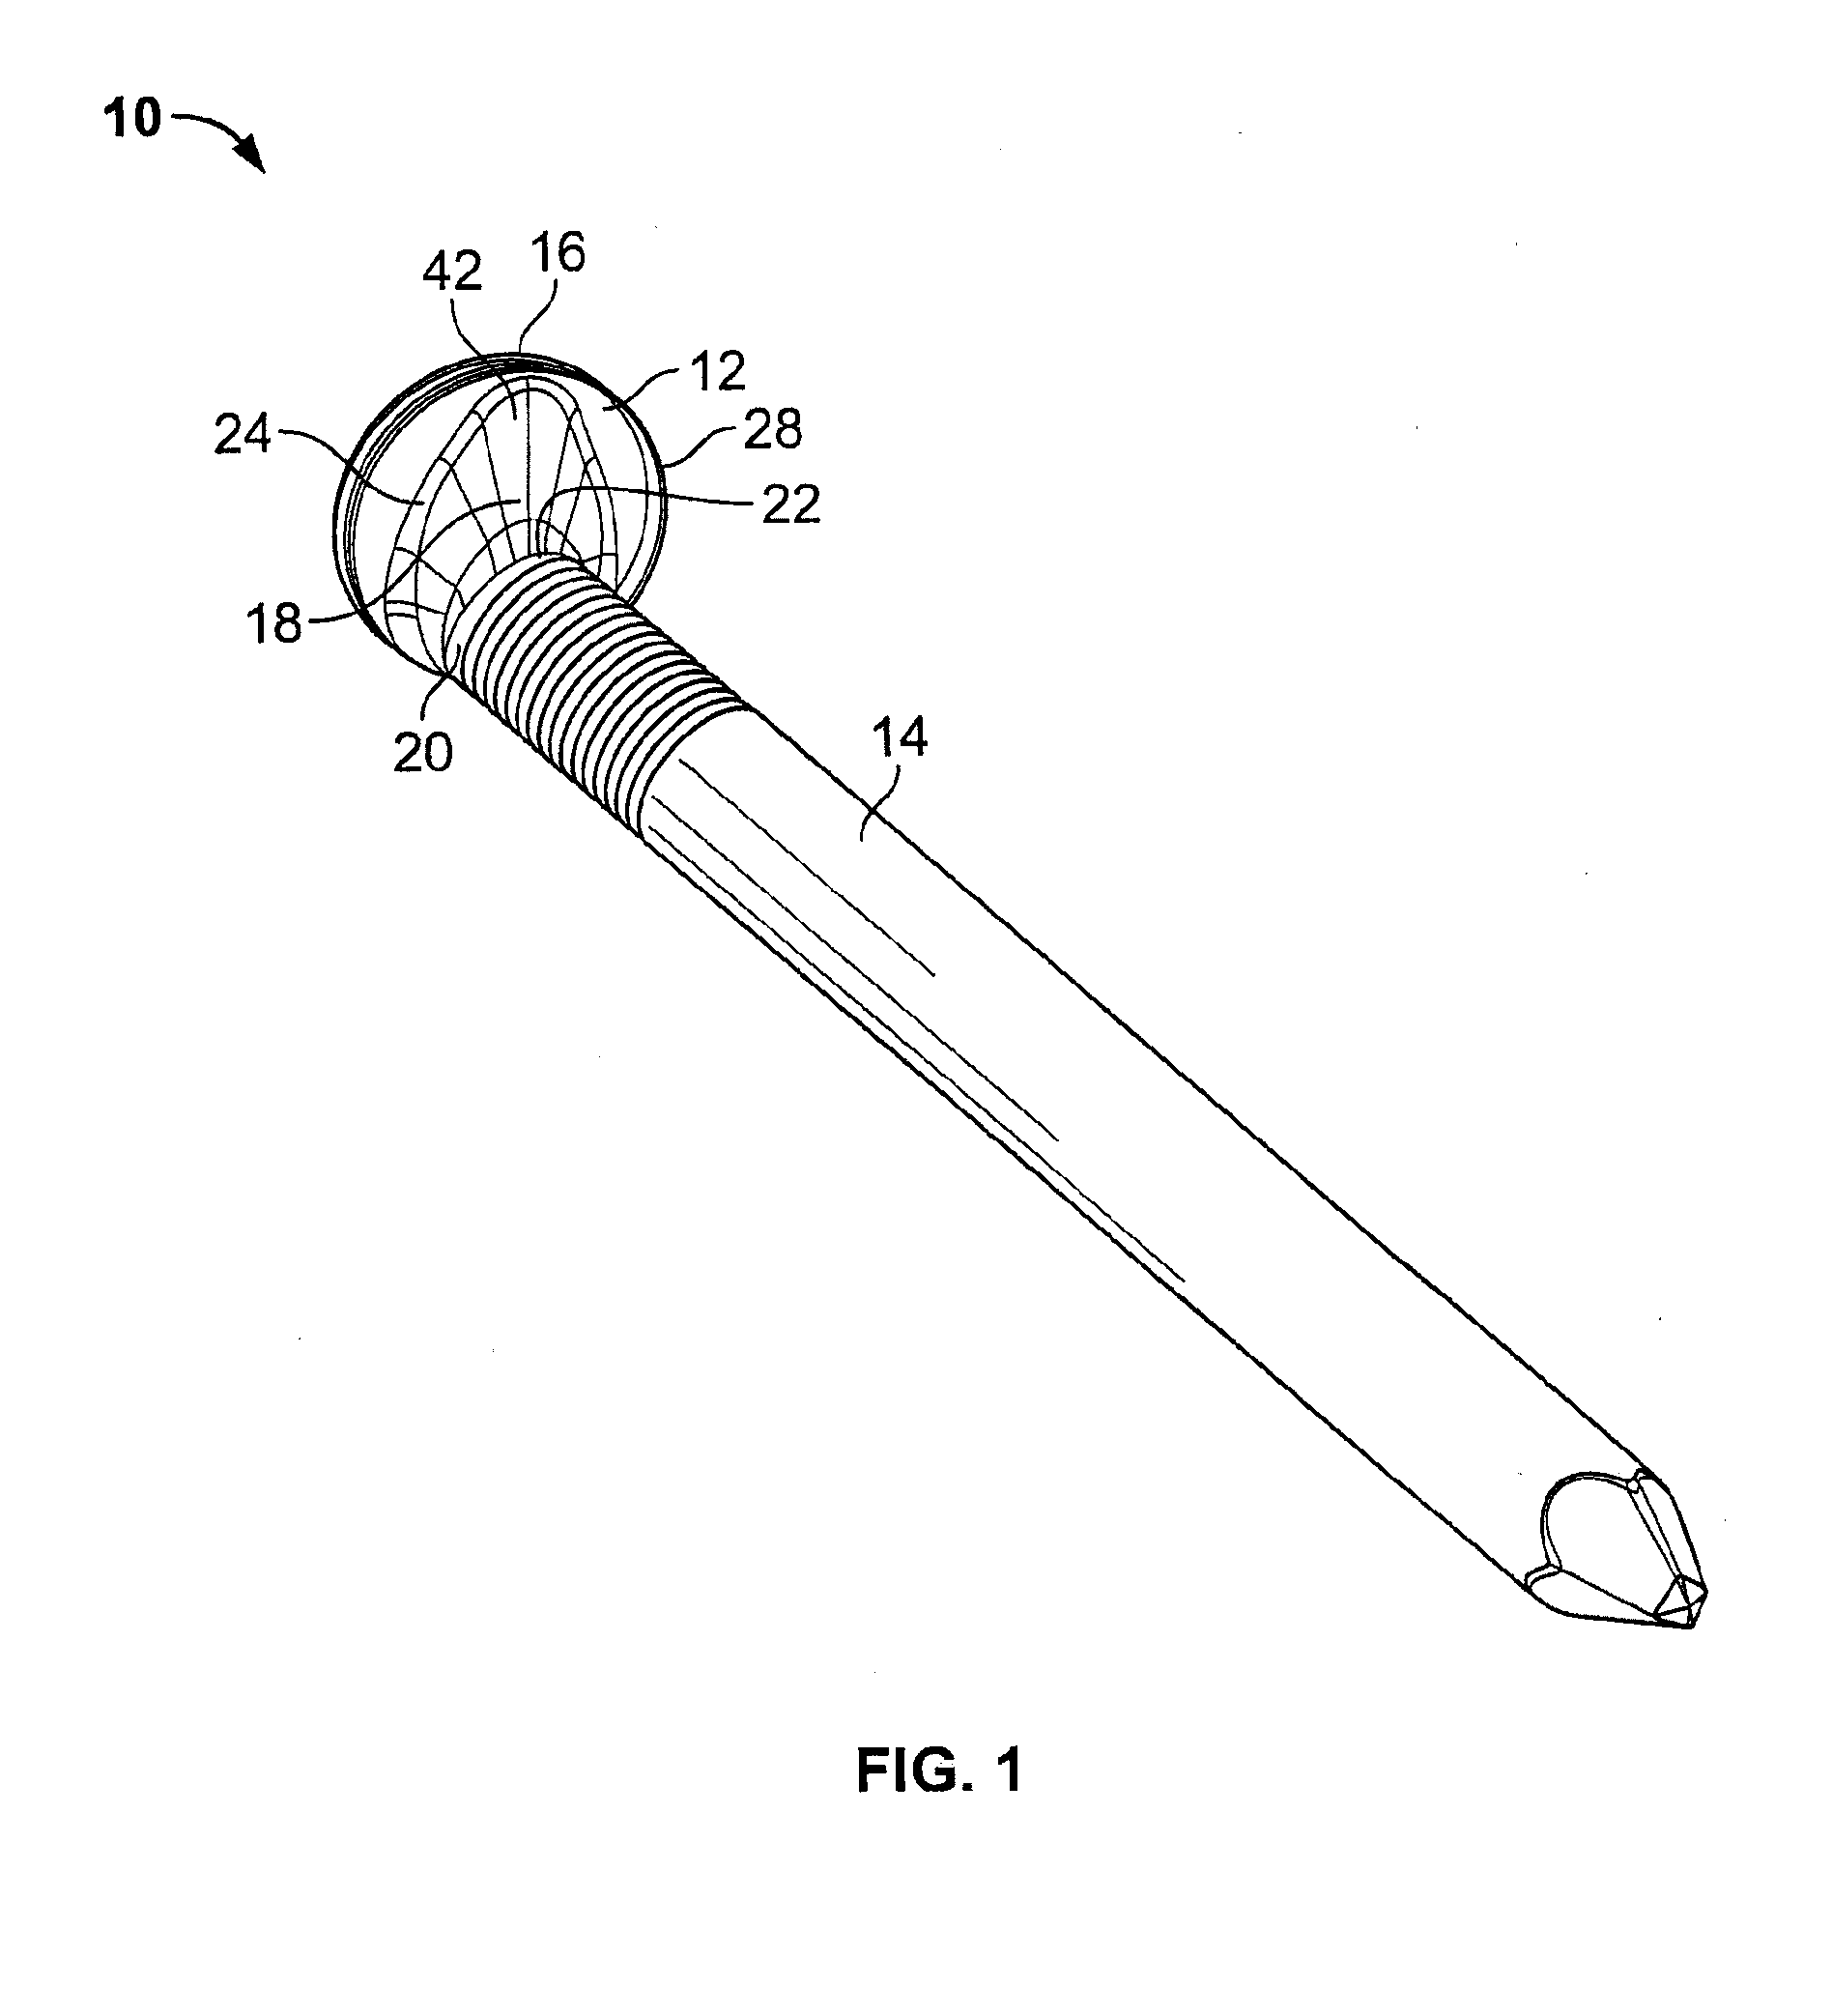 Apparatus and method of making an offset nail